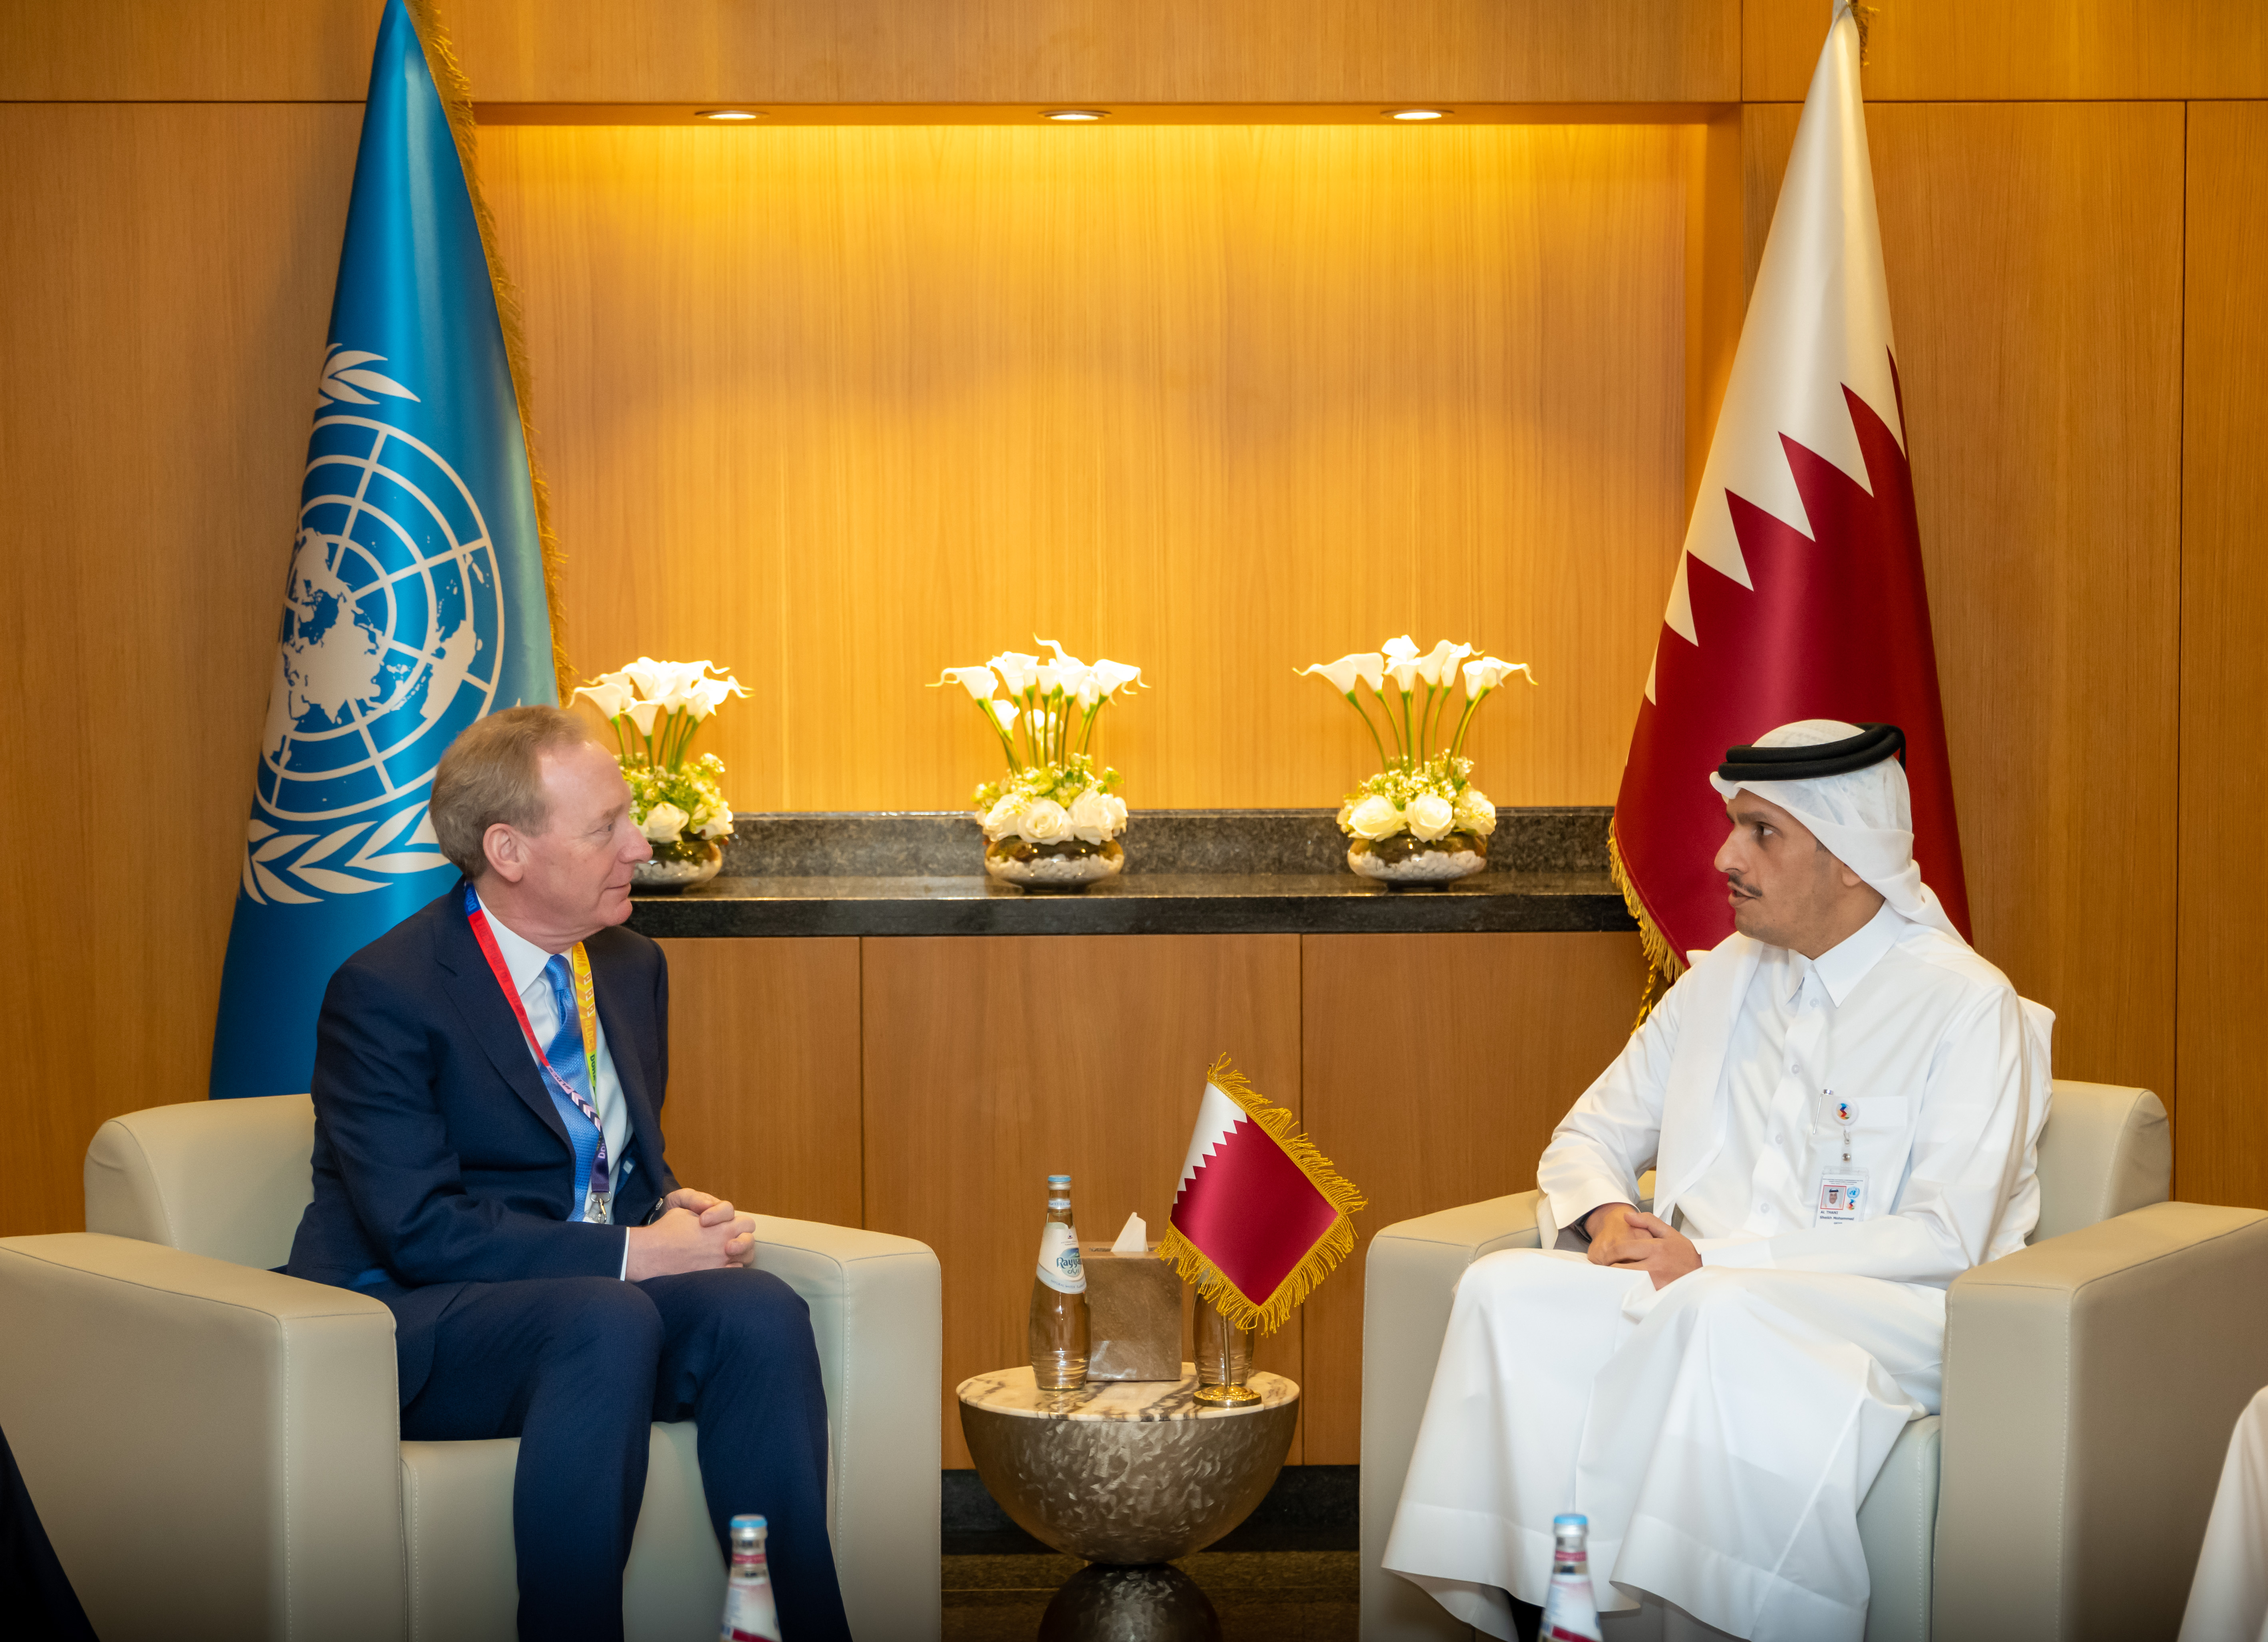 Deputy Prime Minister and Minister of Foreign Affairs Meets Vice Chairman and President of Microsoft